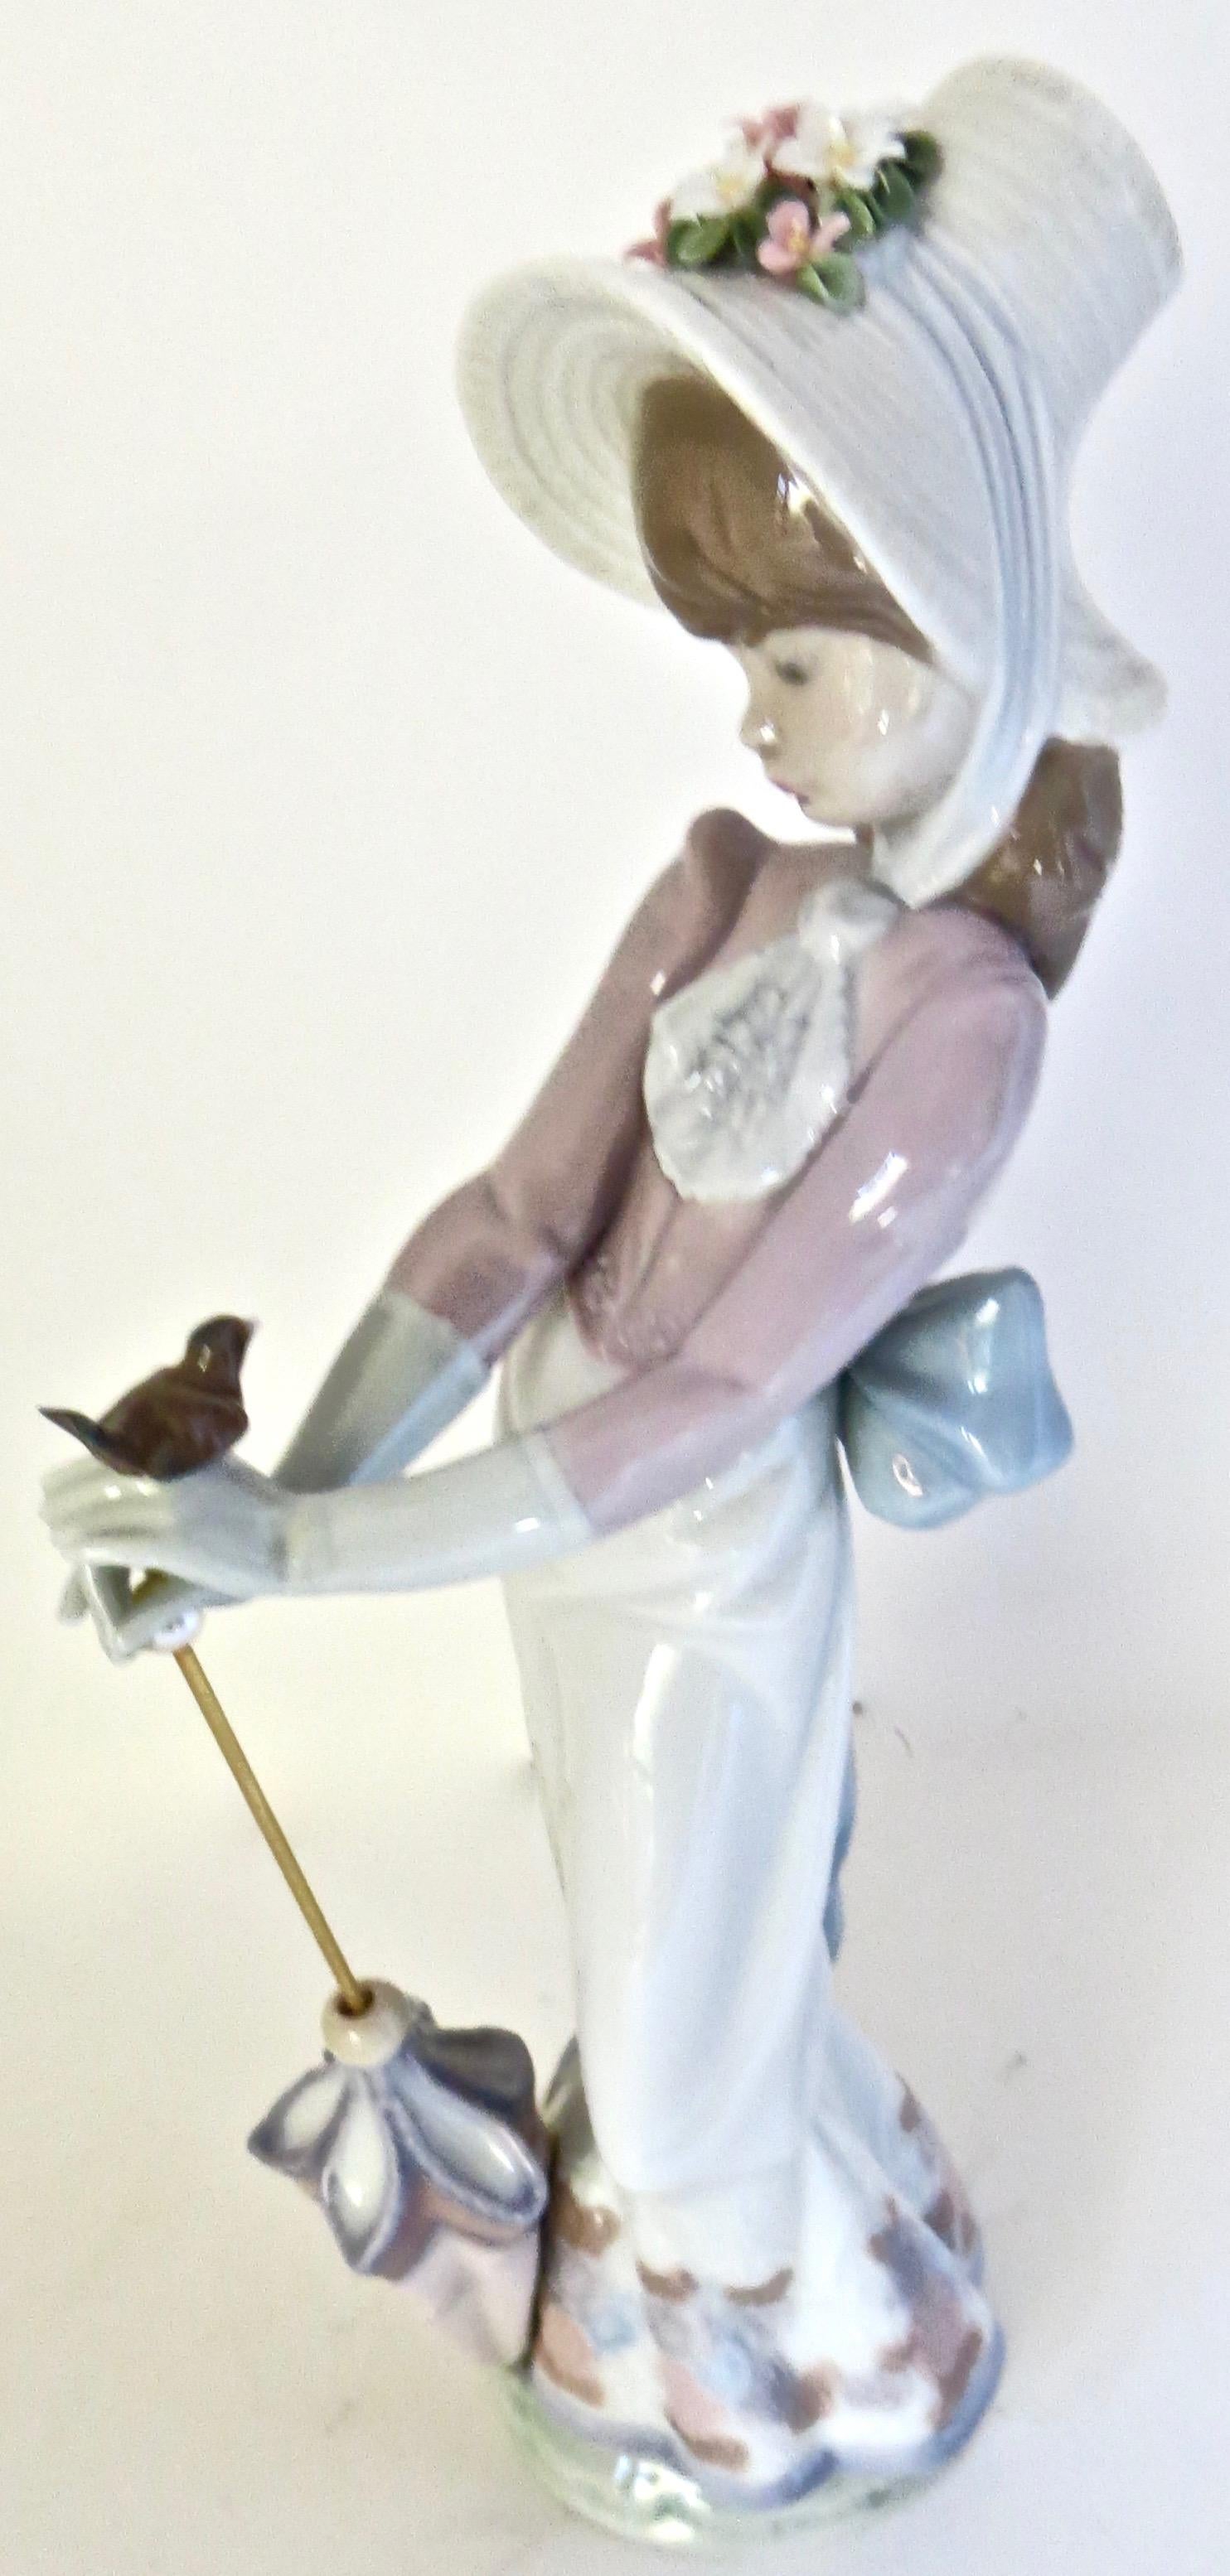 This was a limited edition hand painted porcelain made in 1992 and retired in 1995; manufactured by Lladro in Spain. Designed and sculpted by world renowned artist, Juan Huerta, it is entitled 